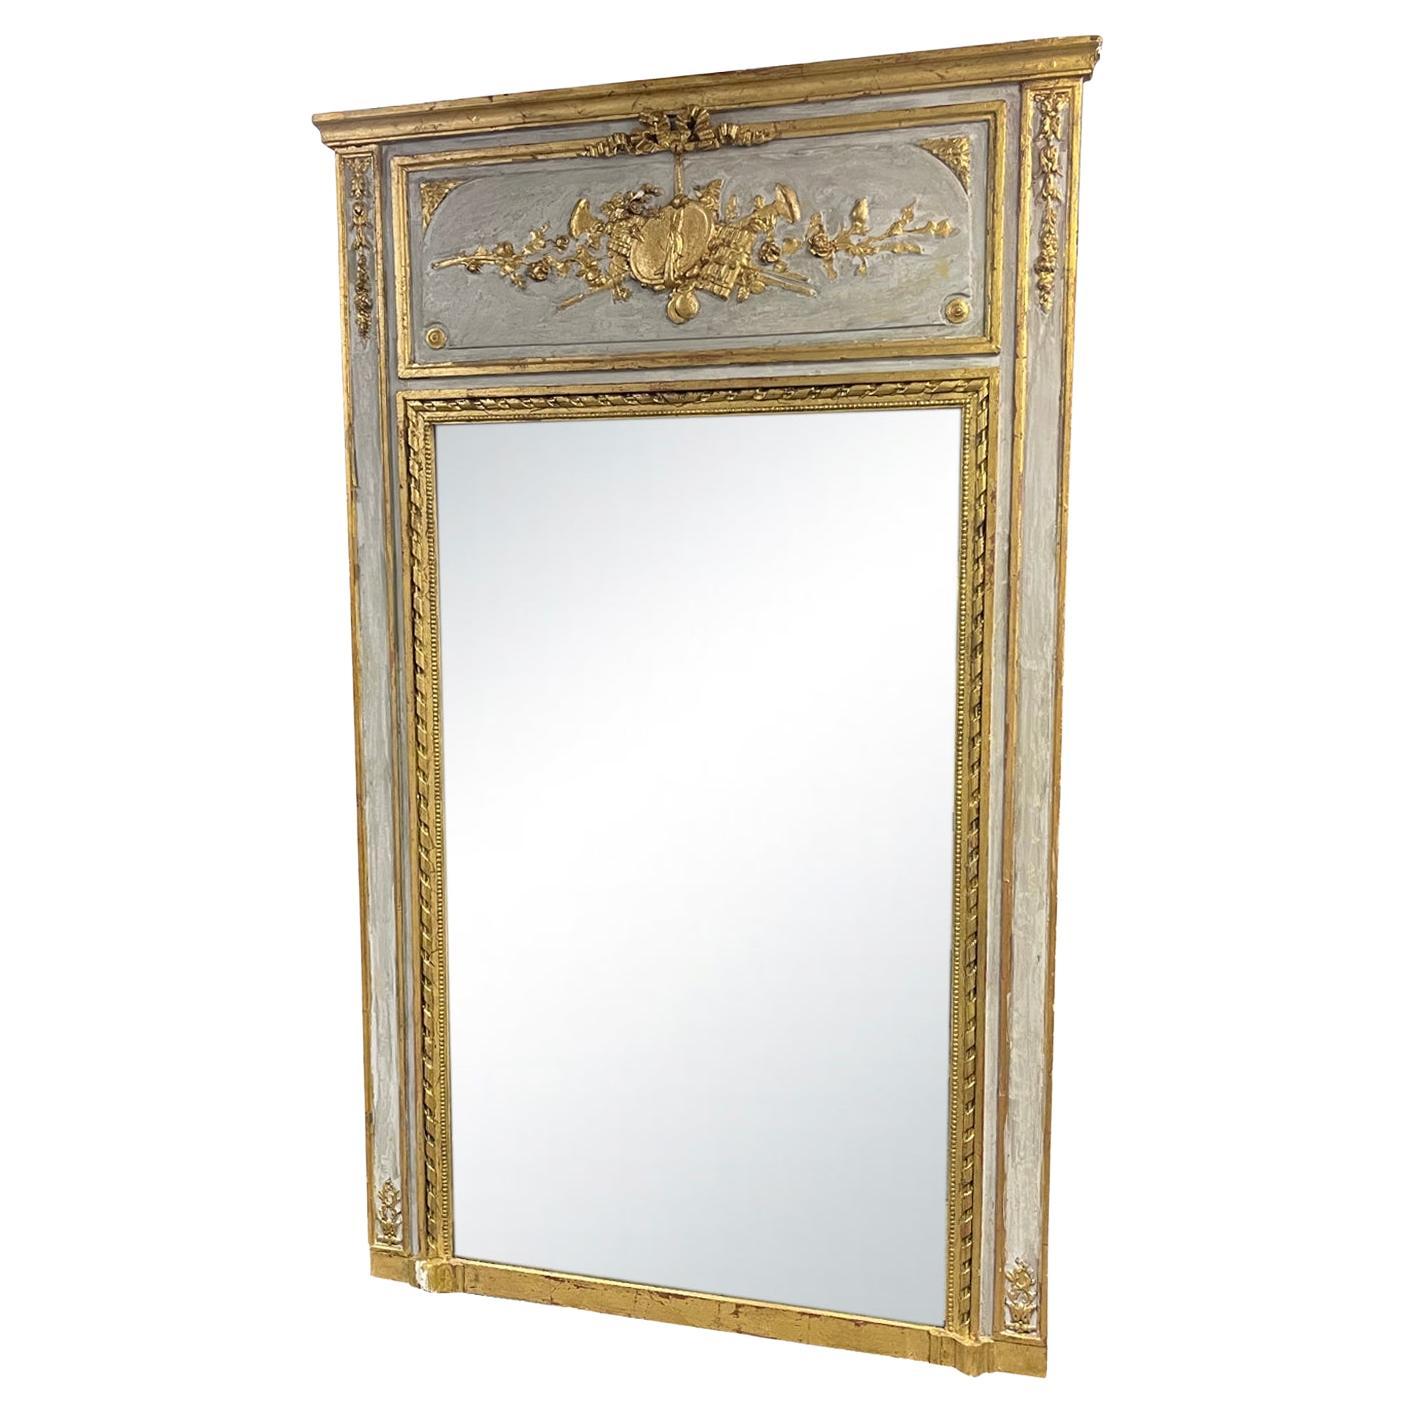 19th Century French Louis XVI Antique Gilded Wood Trumeau, Floor Glass Mirror For Sale